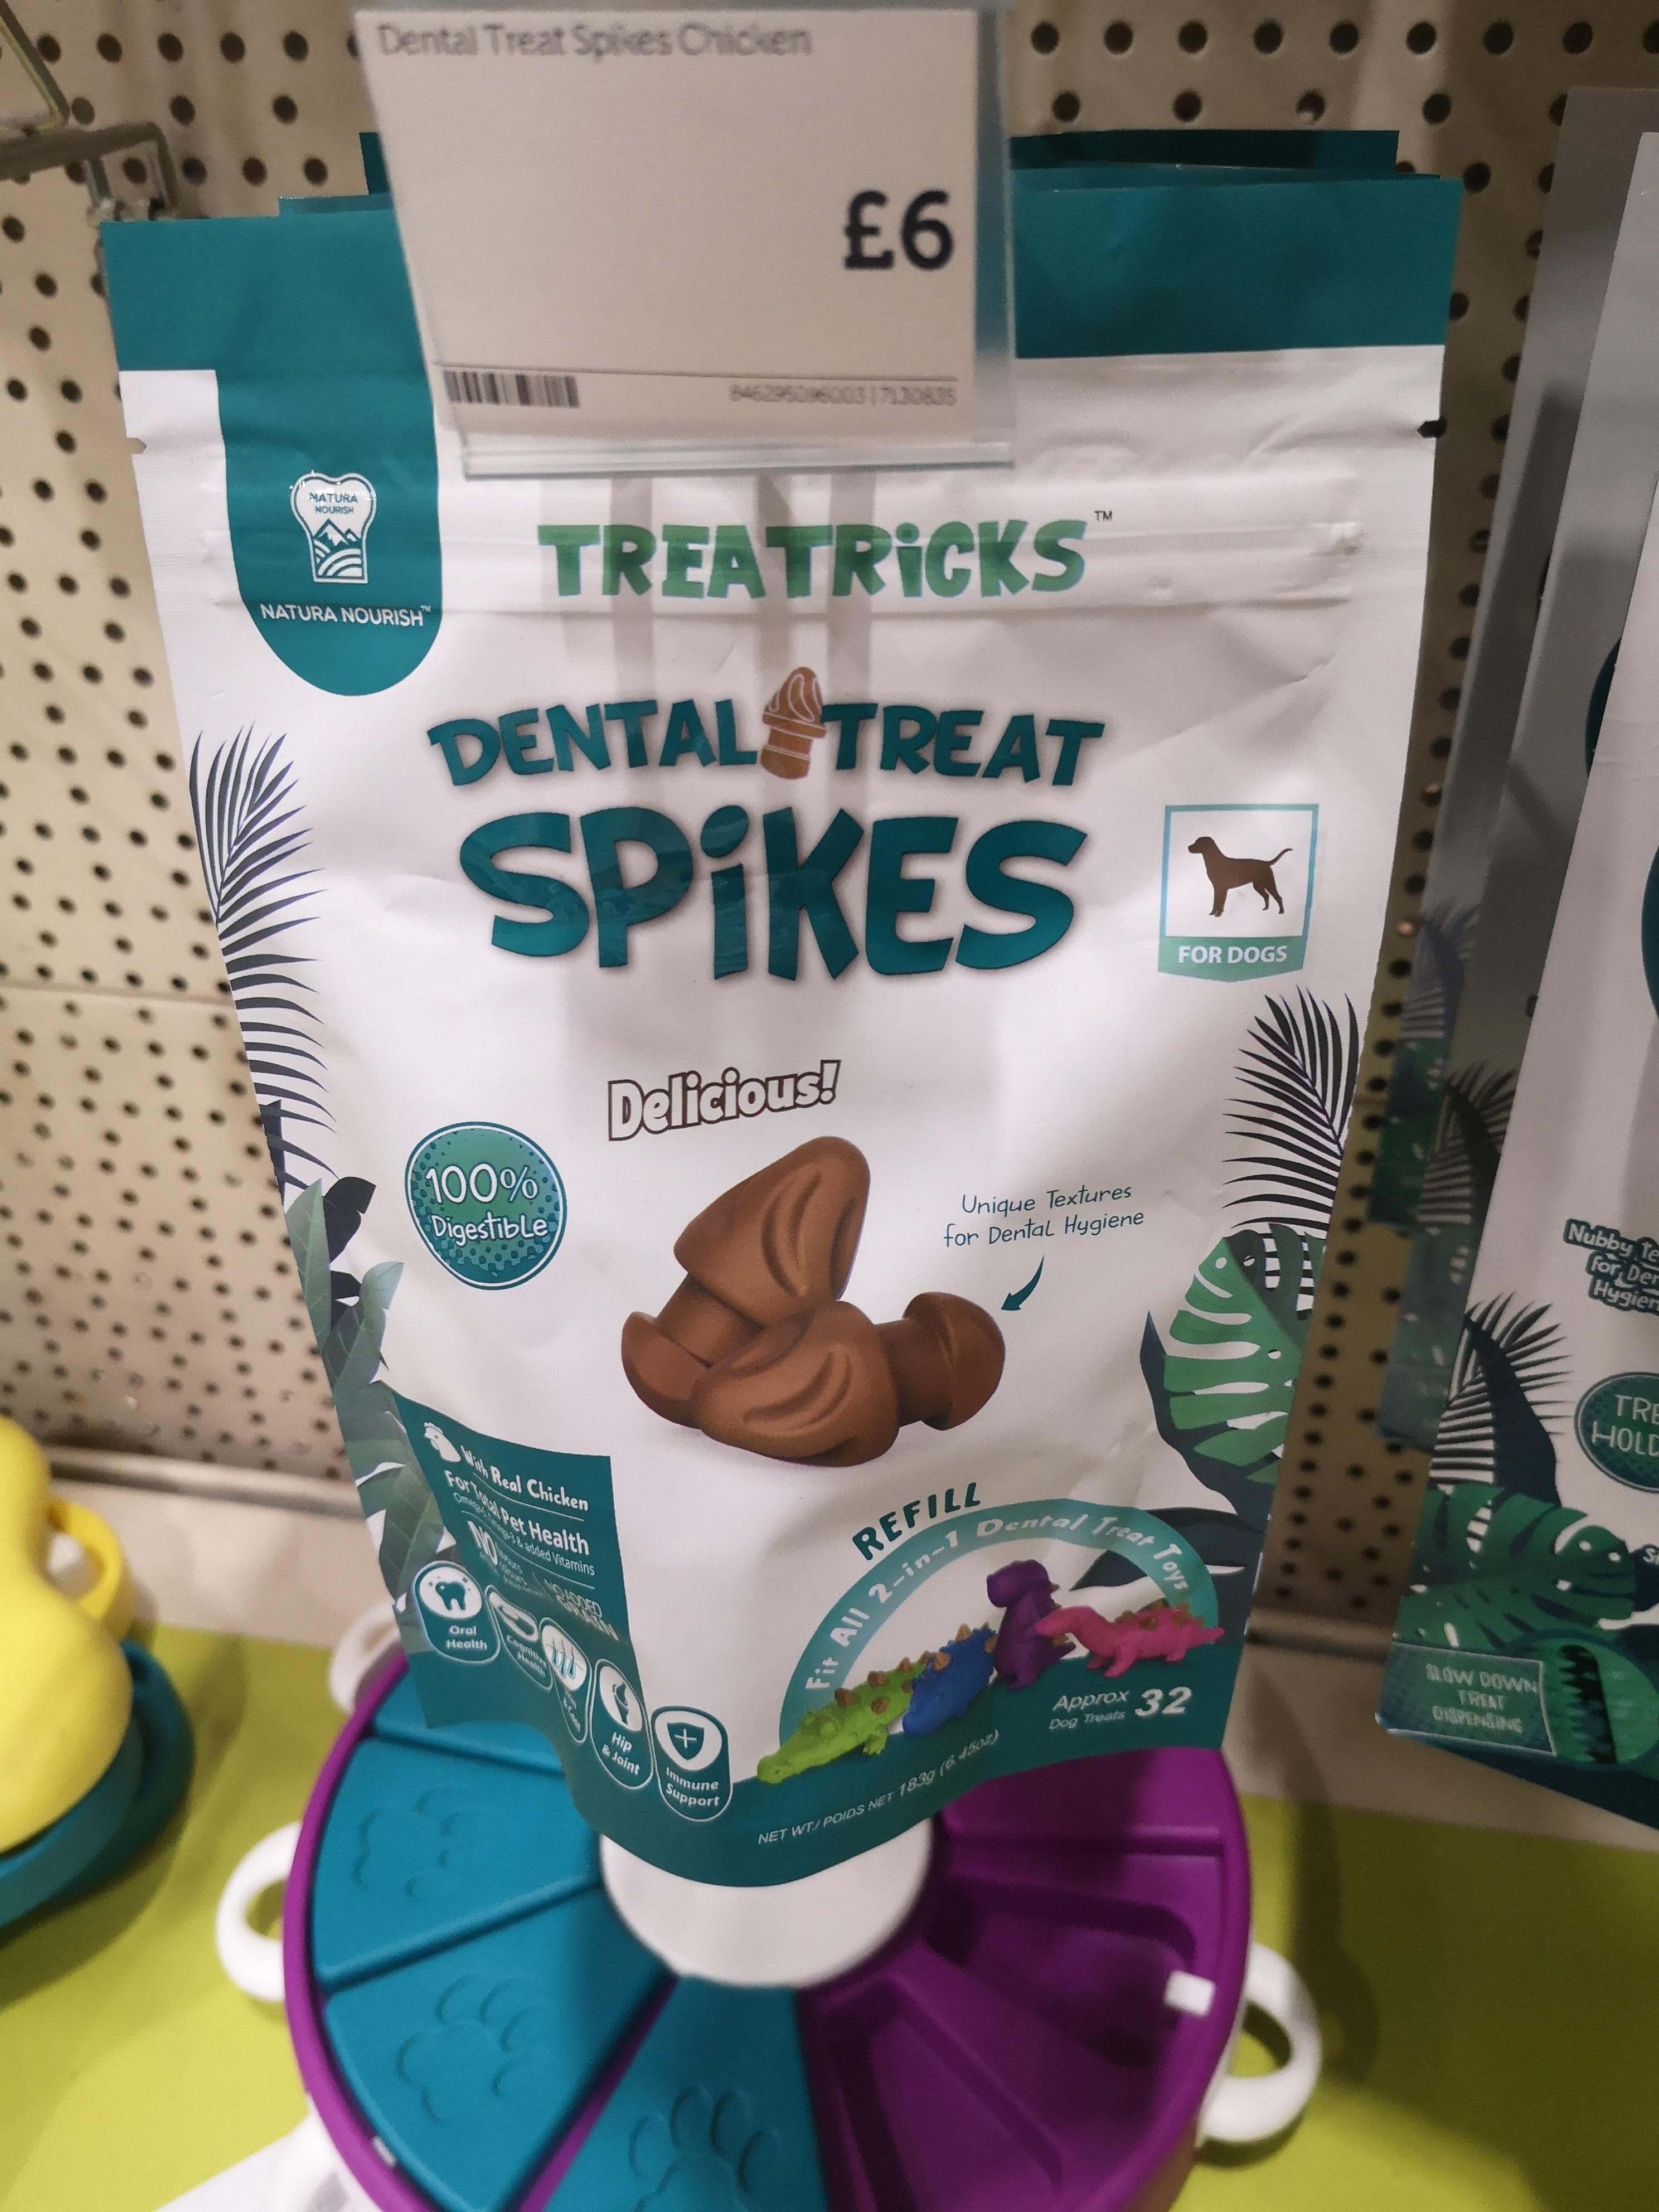 Some questionable dog treats at my work